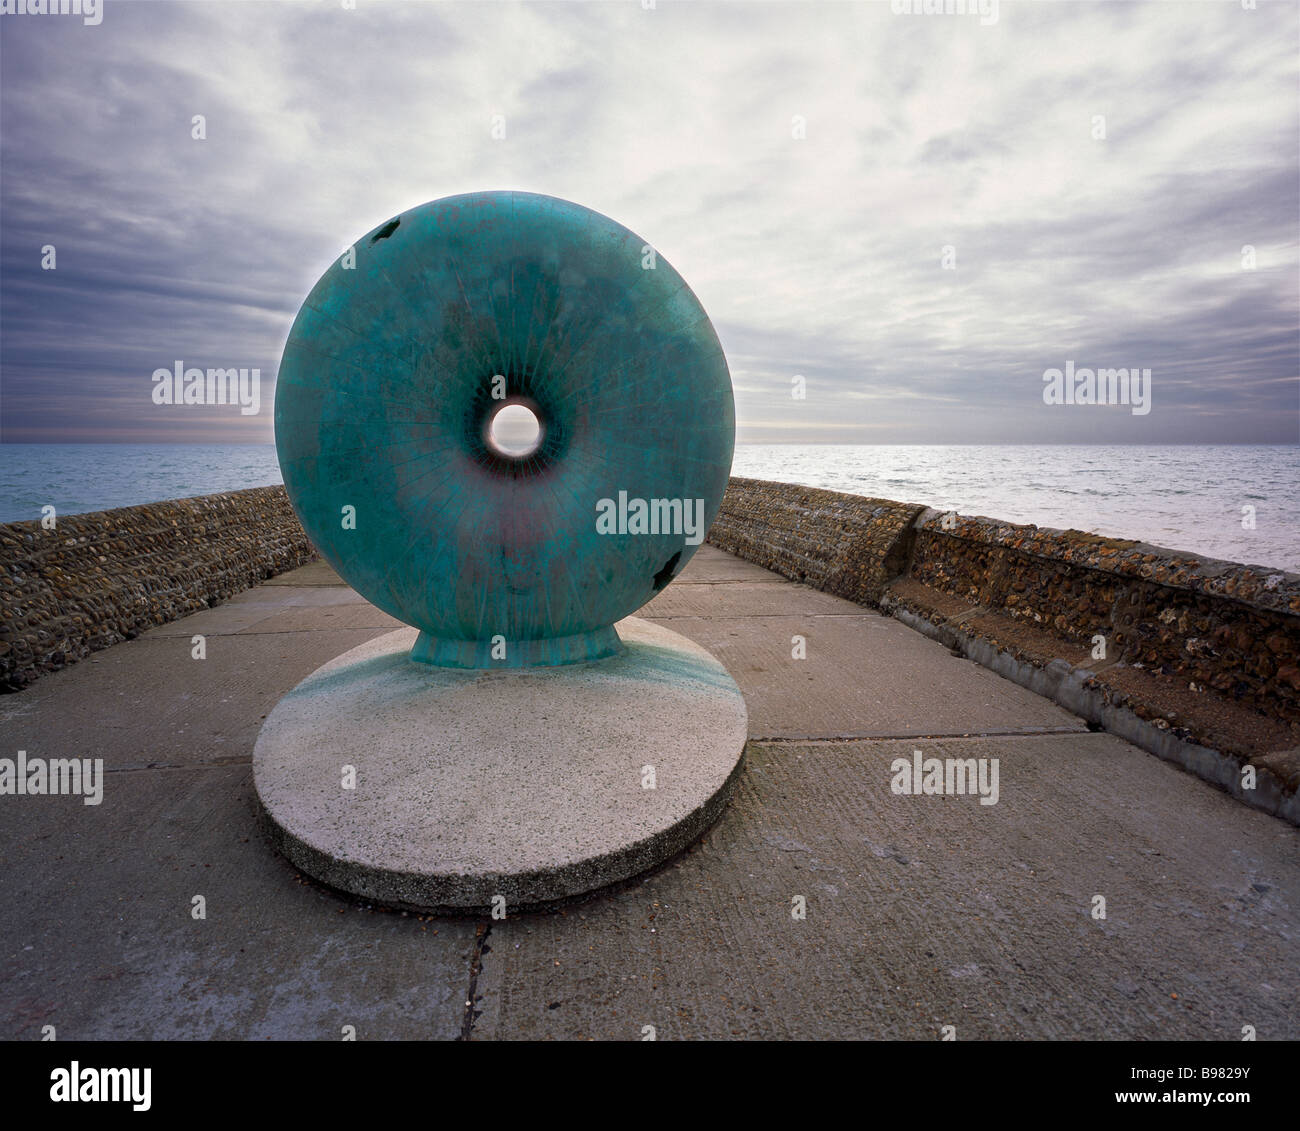 The doughnut shaped Sculpture called Afloat Brighton, Sussex, England, UK. Stock Photo